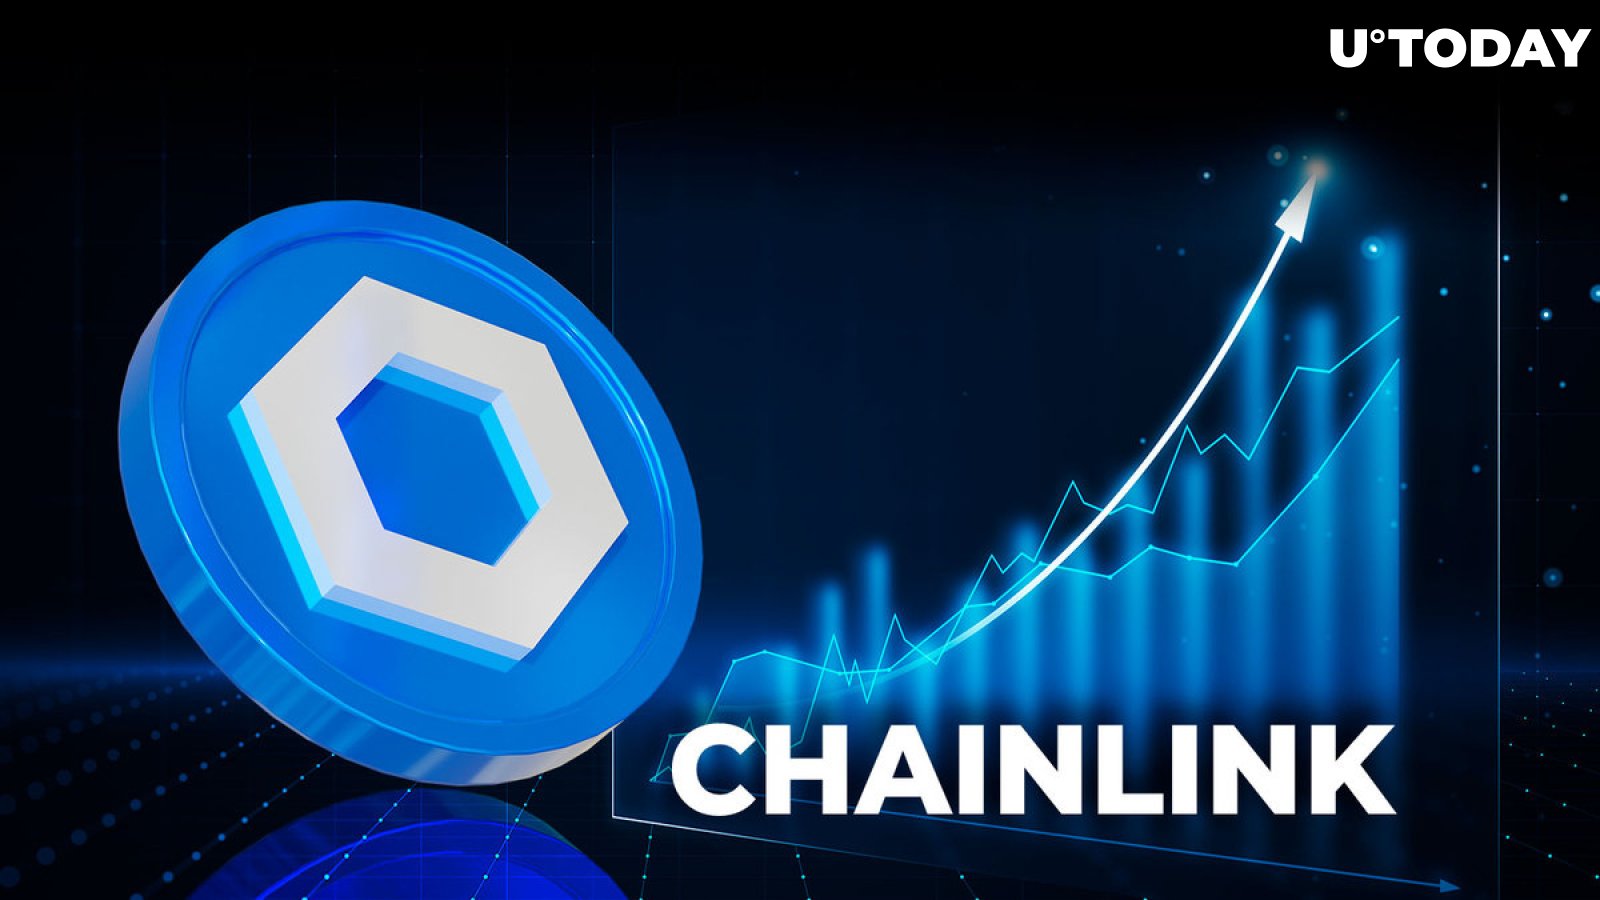 Chainlink (LINK) Reaches New All-Time High